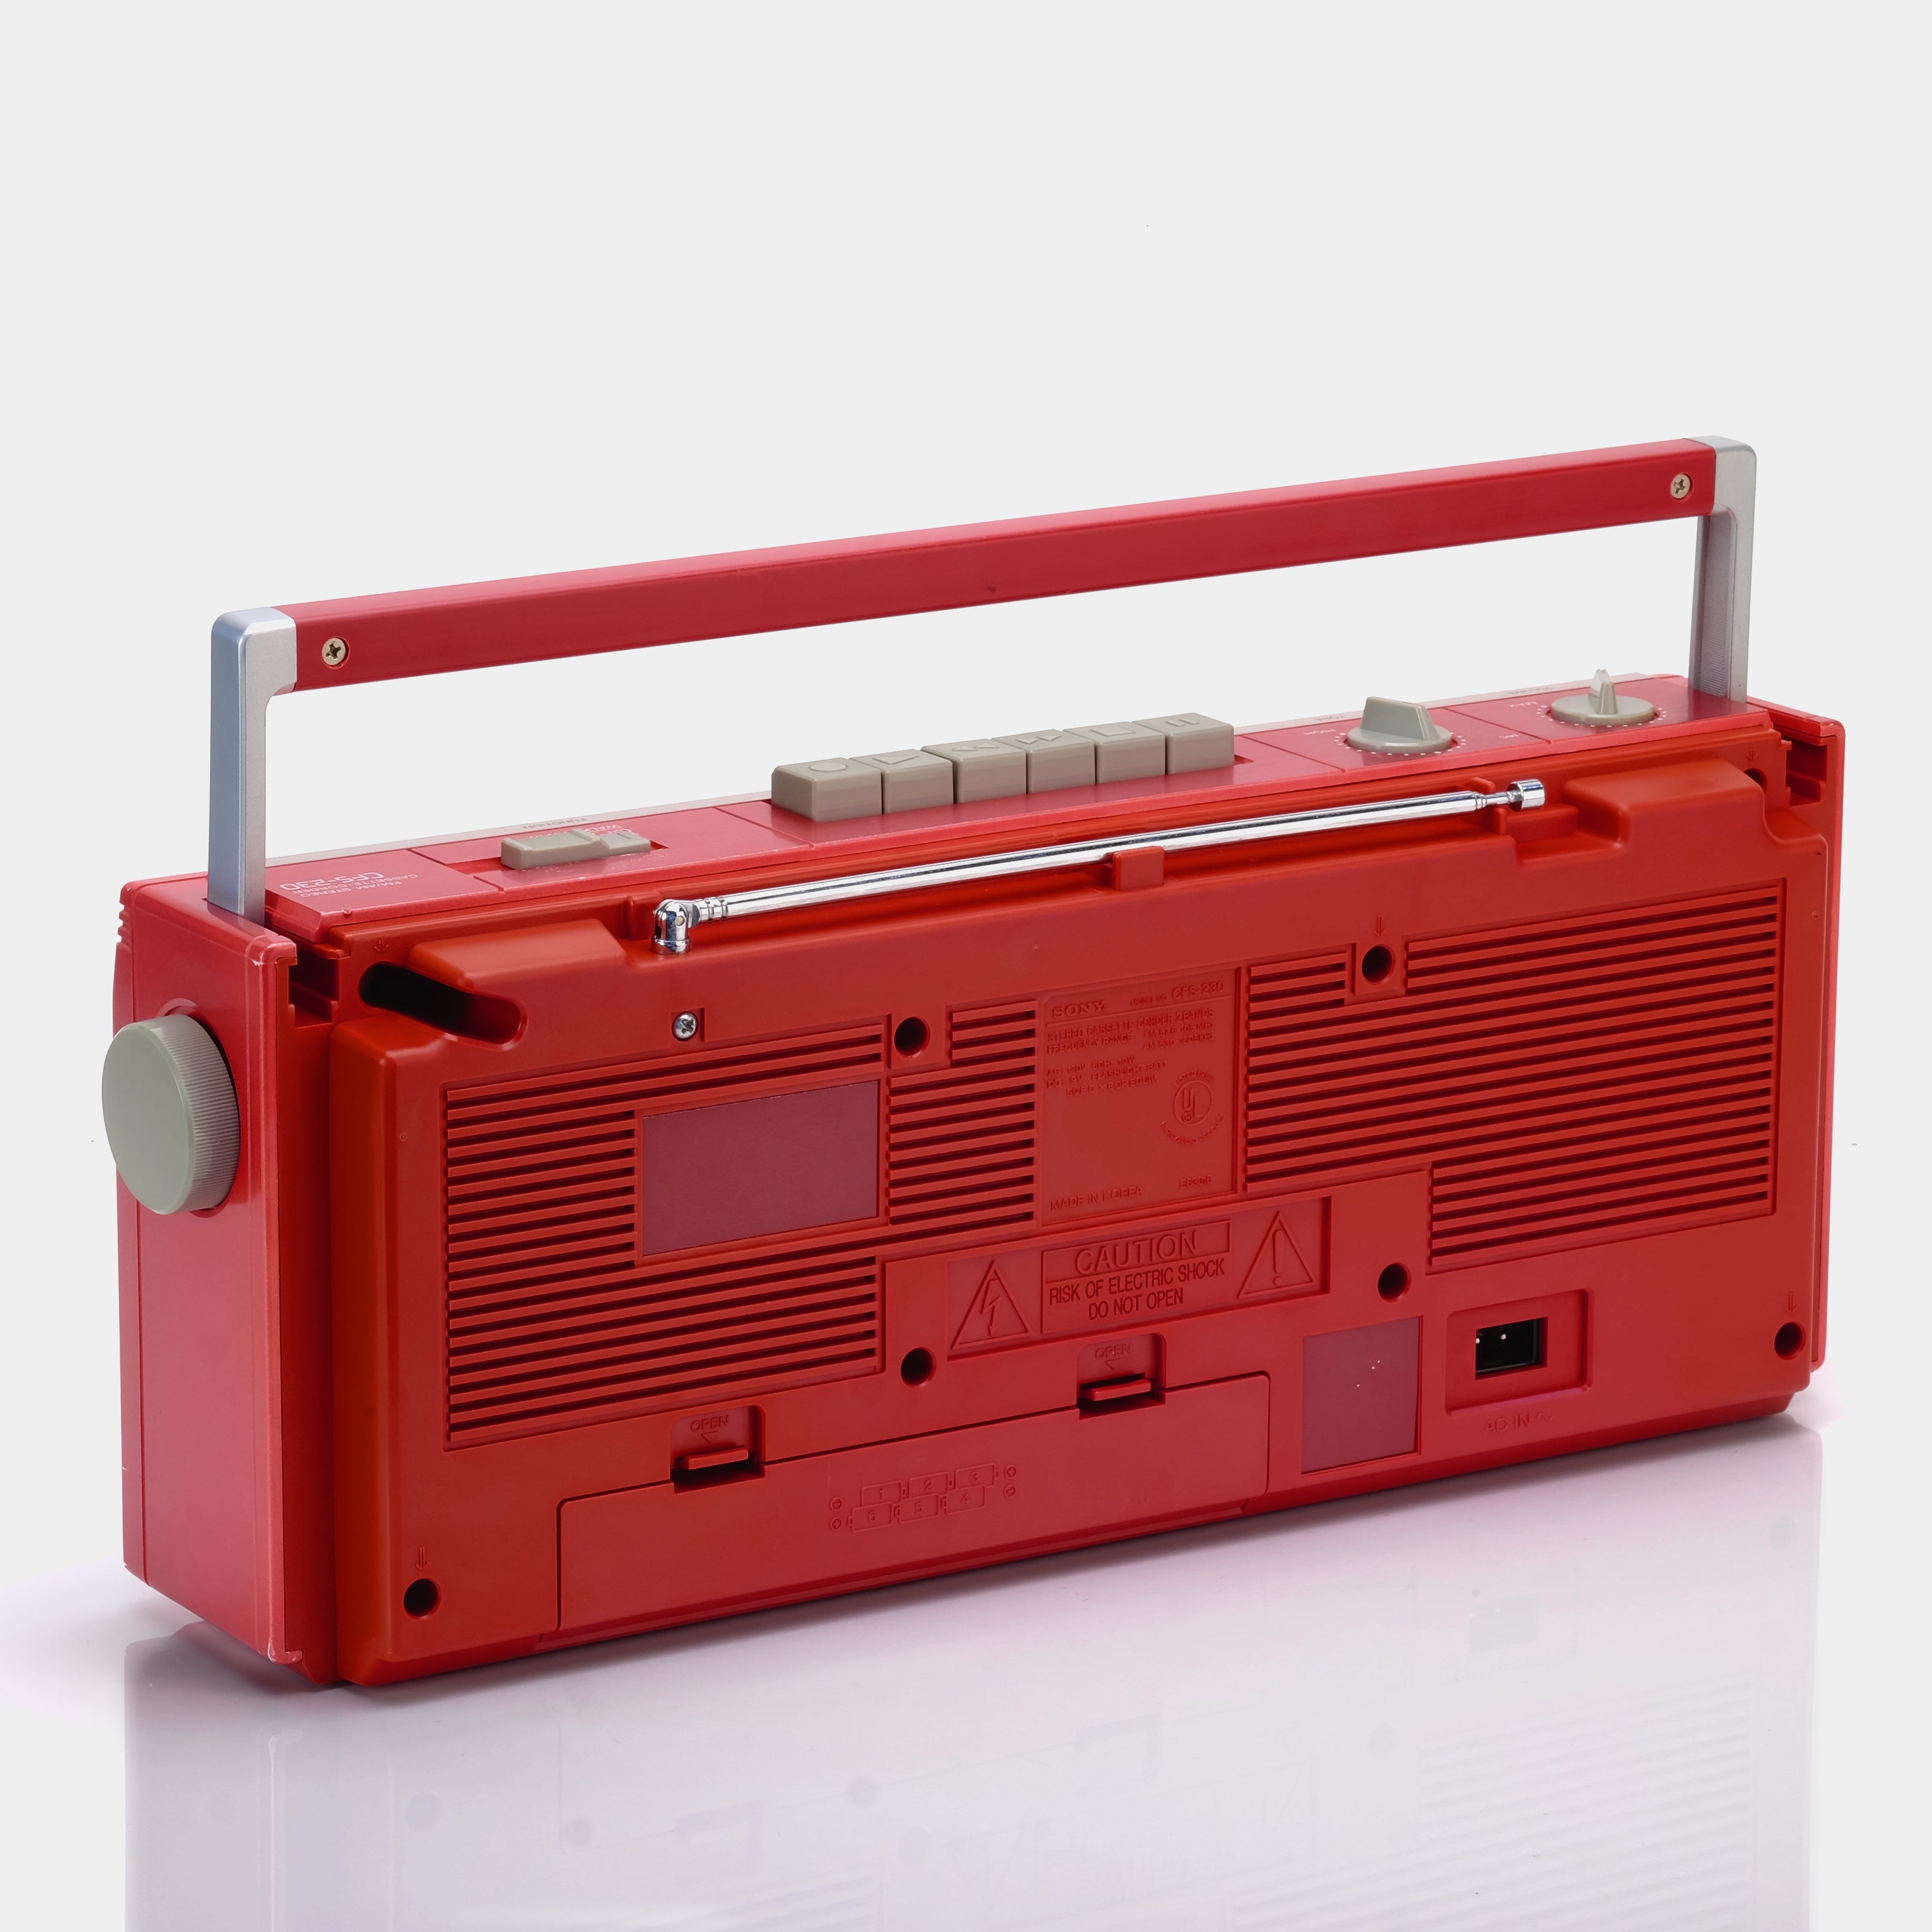 Sony CFS-230 Red Boombox Cassette Player